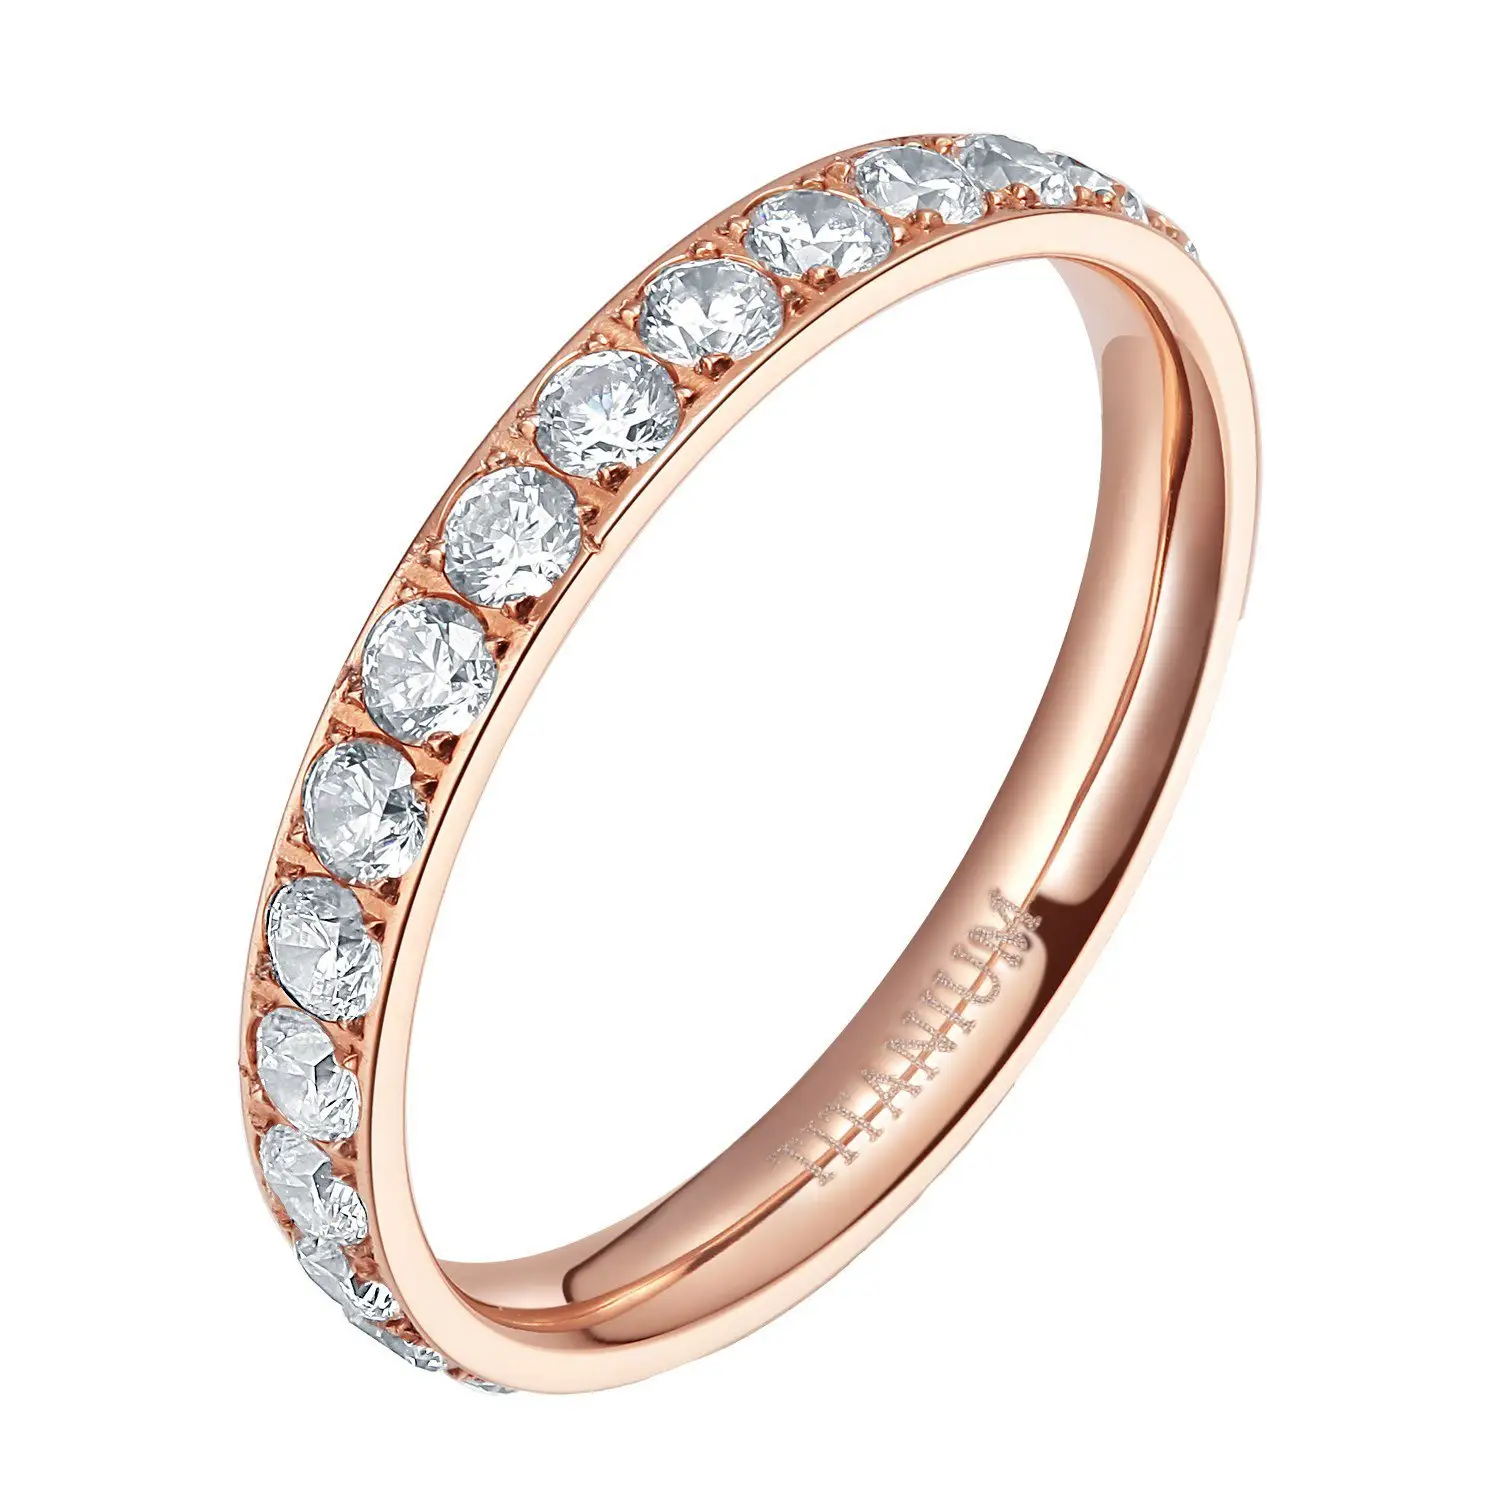 3mm Rose Gold Plated Women Titanium Ring Cubic Zirconia Engagement Wedding Bands